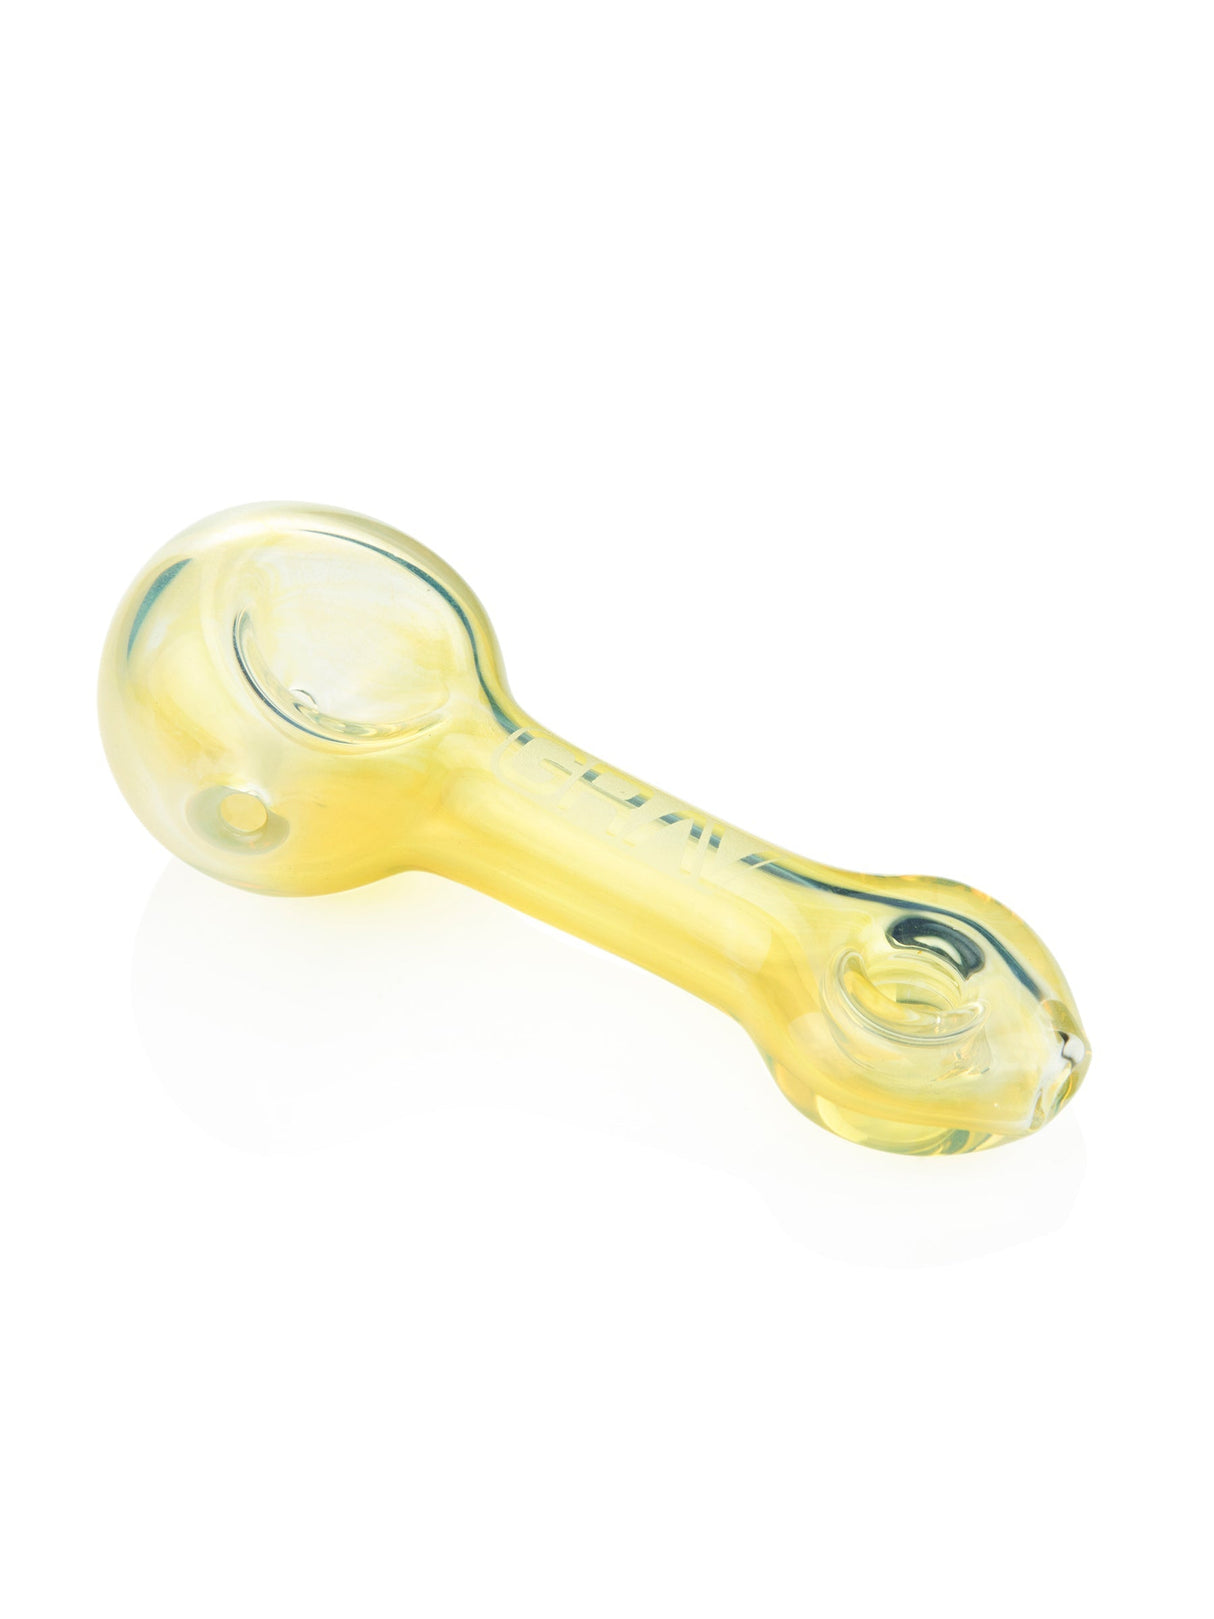 GRAV Mini Spoon Pipe in Fumed Color - Compact Borosilicate Glass Hand Pipe with Deep Bowl